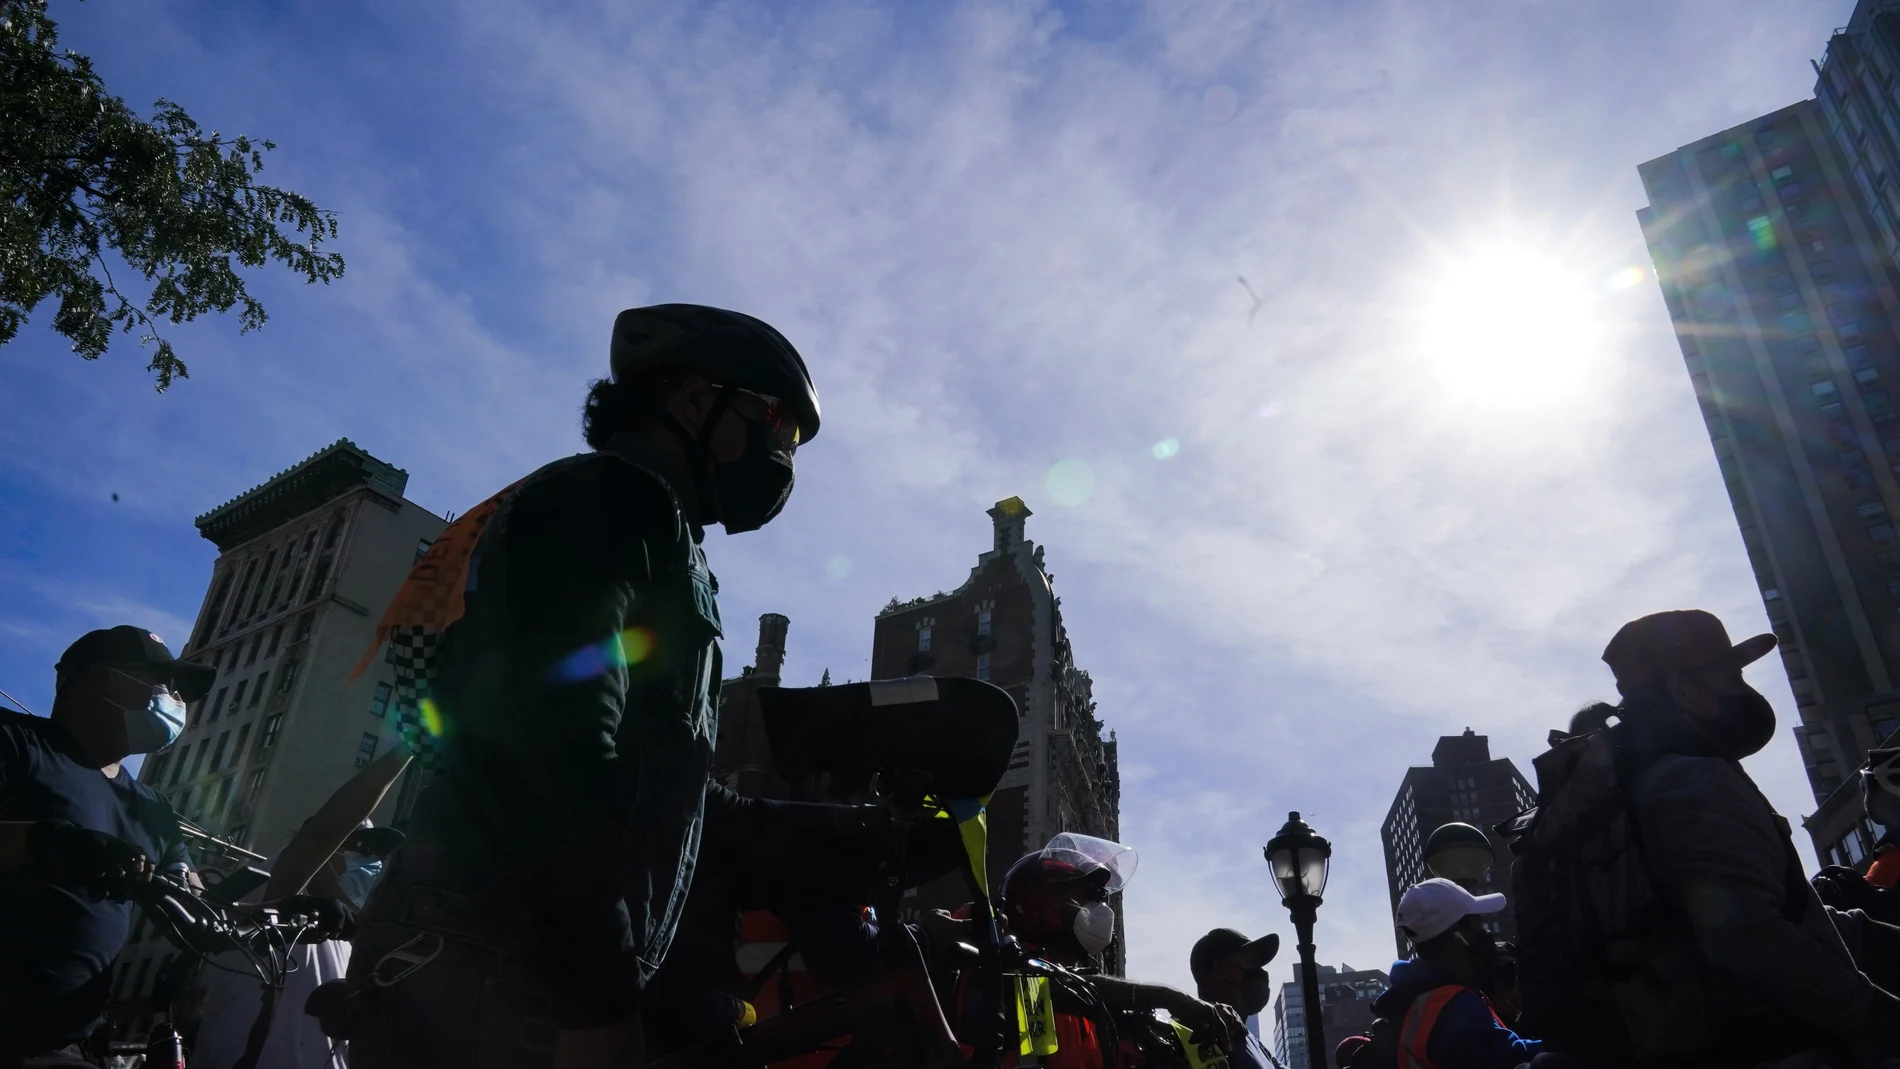 Bicycle delivery workers for restaurants and food applications protest to demand more protection during a wave of robberies of their electrical bicycles Thursday, Oct. 15, 2020, in New York. (AP Photo/Frank Franklin II)